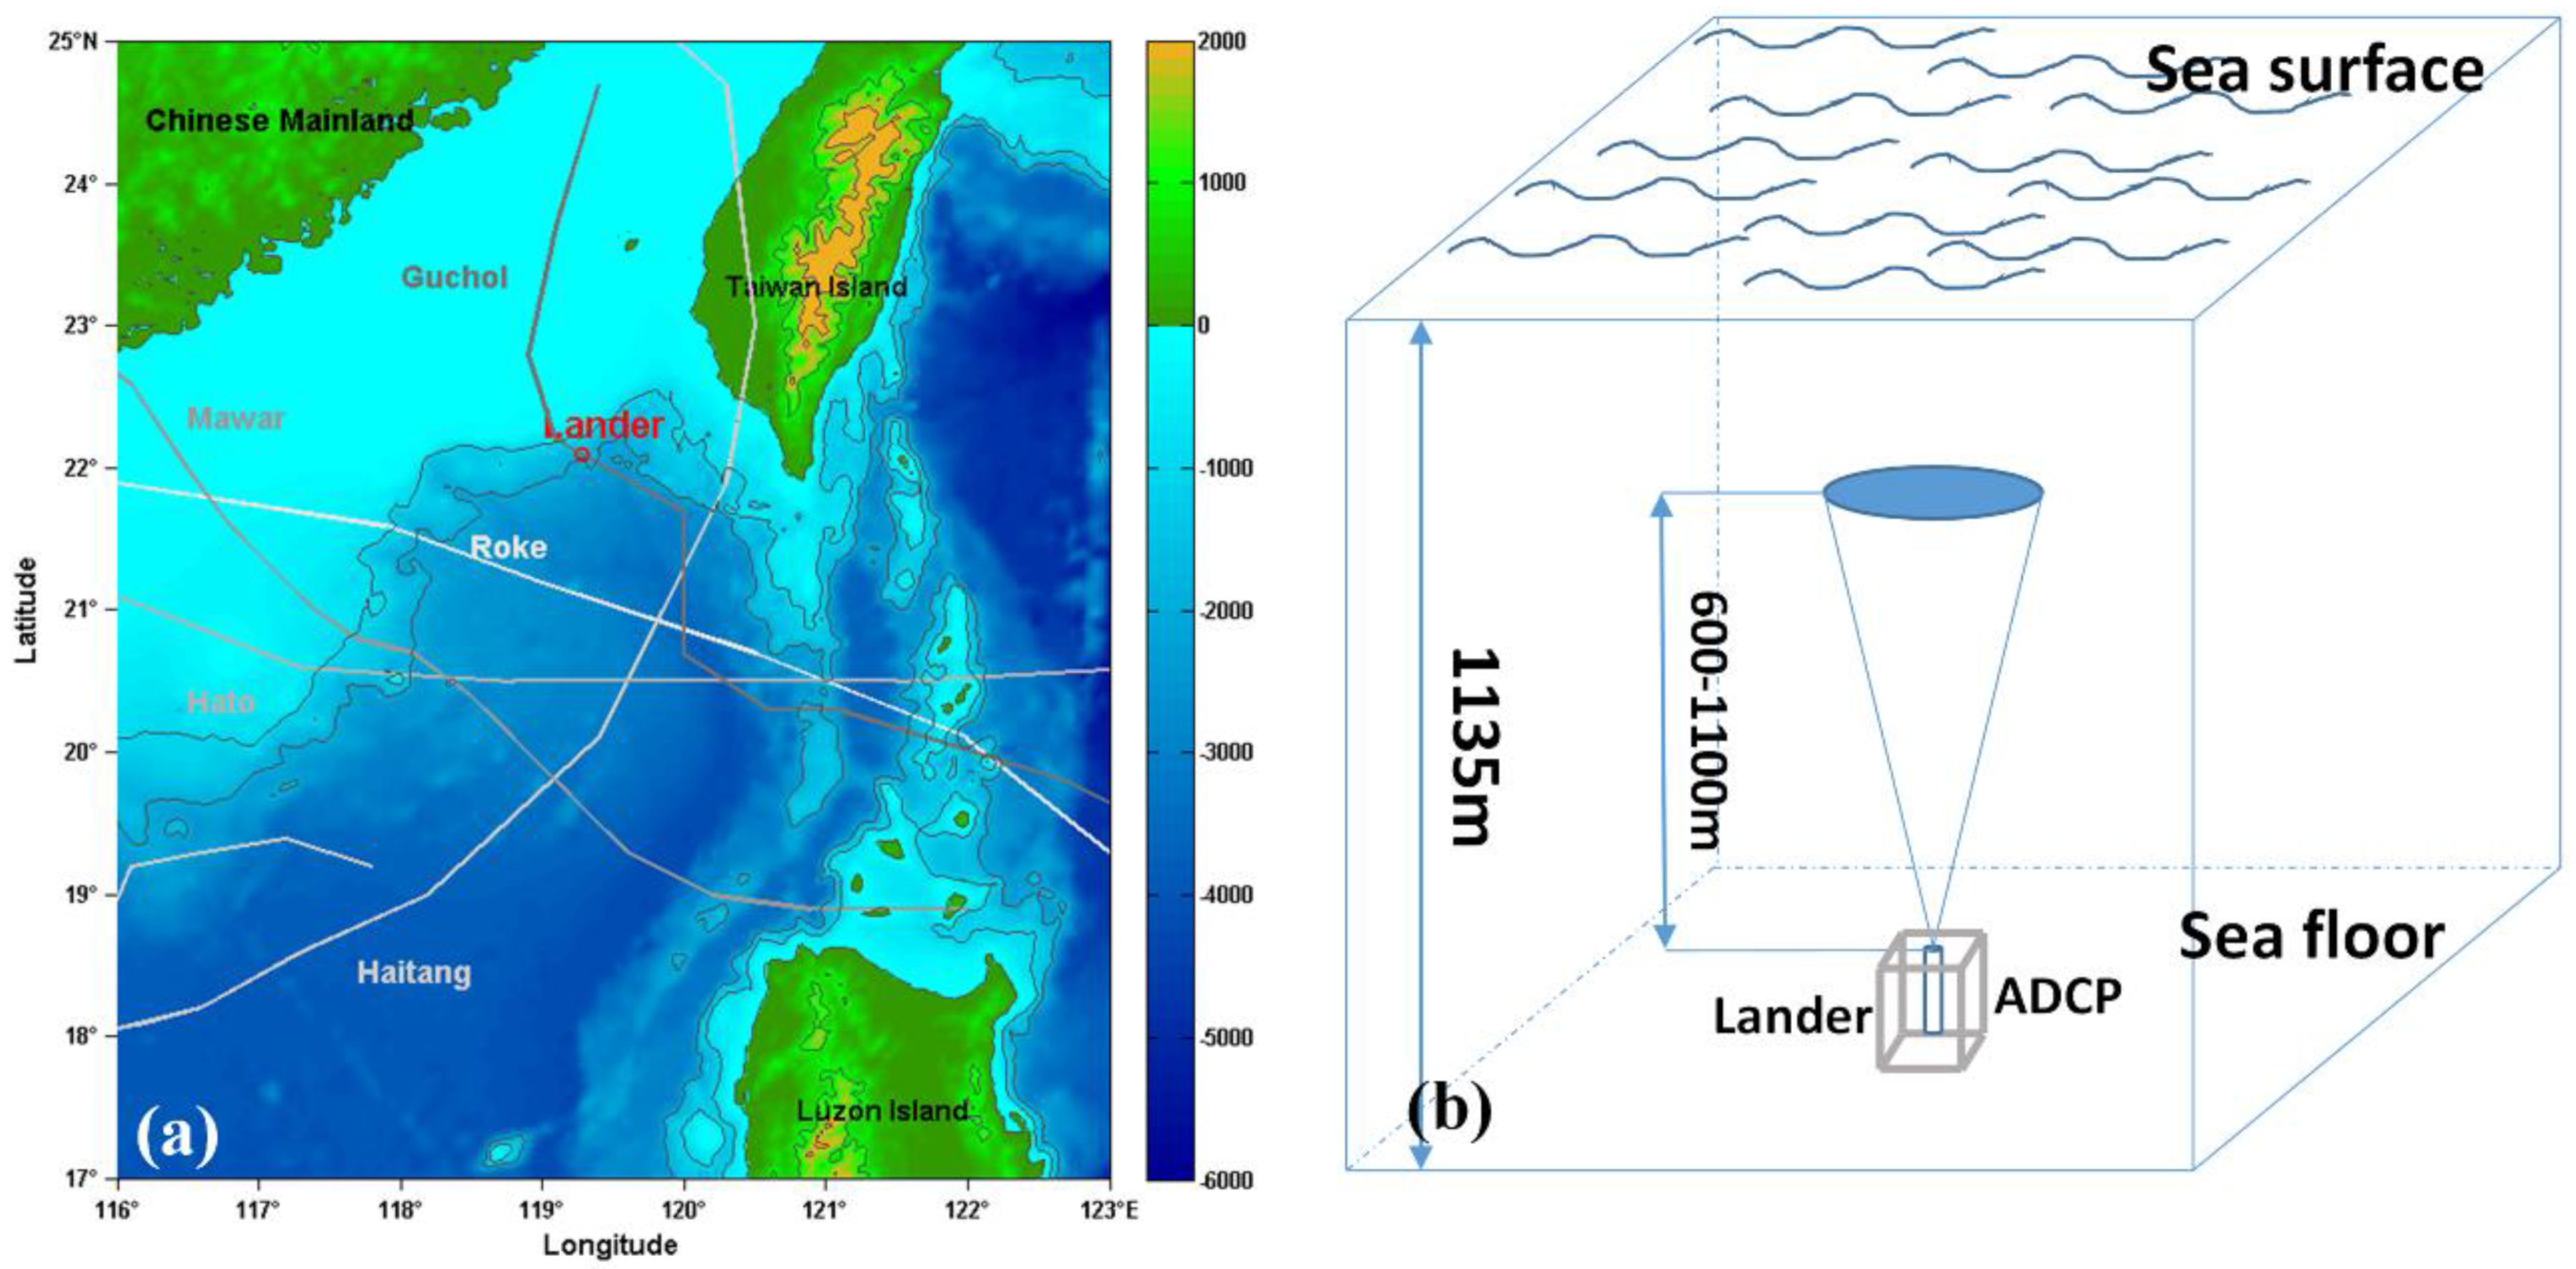 JMSE | Free Full-Text | Different Types of Near-Inertial Internal Waves  Observed by Lander in the Intermediate-Deep Layers of the South China Sea  and Their Generation Mechanisms